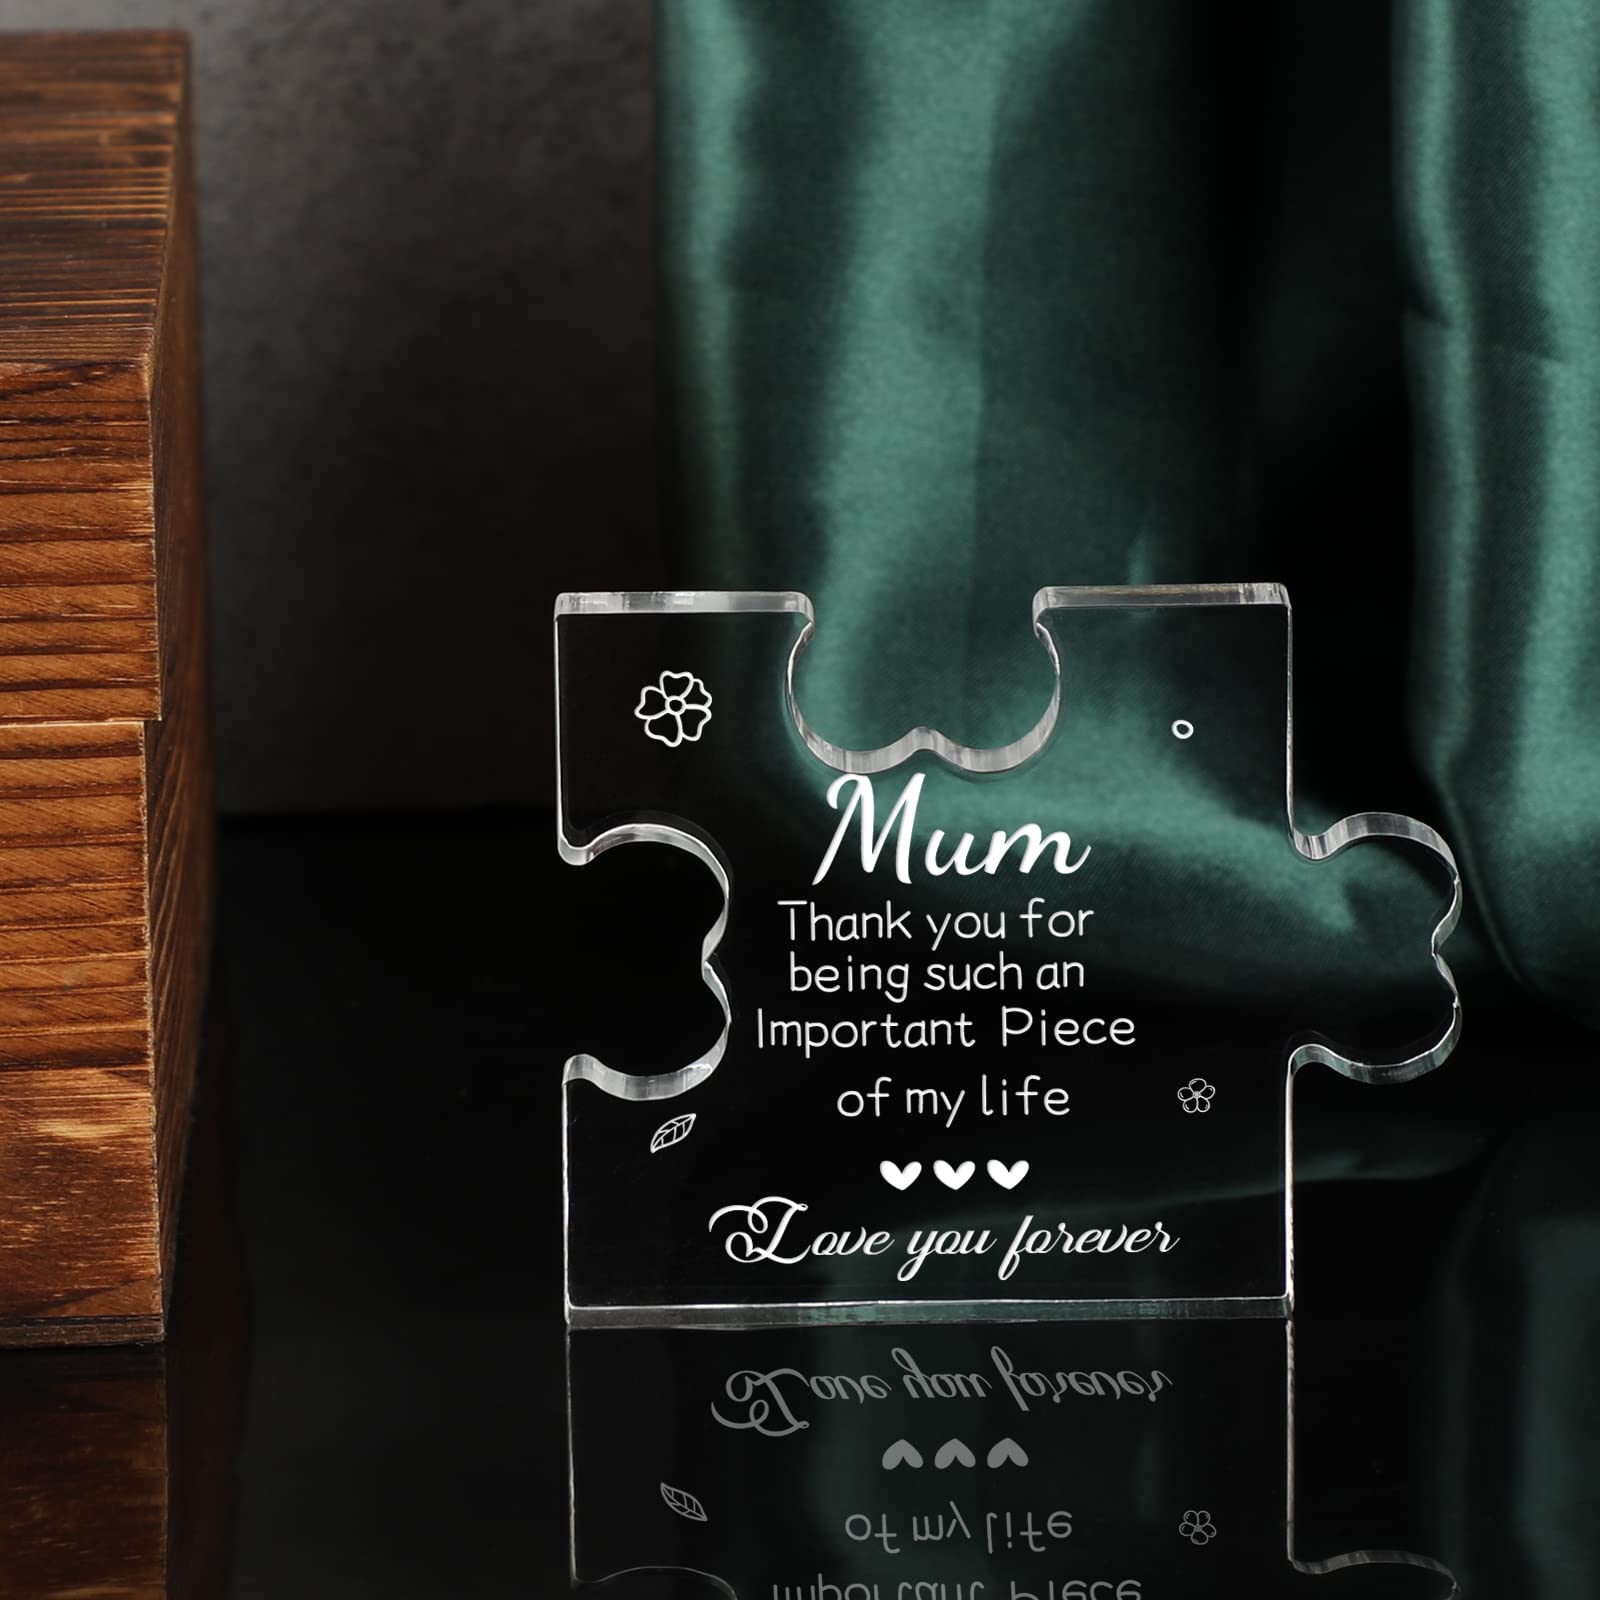 Funnli Gifts for Mum, Engraved Acrylic Block Puzzle Mum Gifts, 3.35 x 2.76 Inch Table Decoration Mum Mummy Presents, Mothers Day Birthday Gifts for Mum from Daughter Son